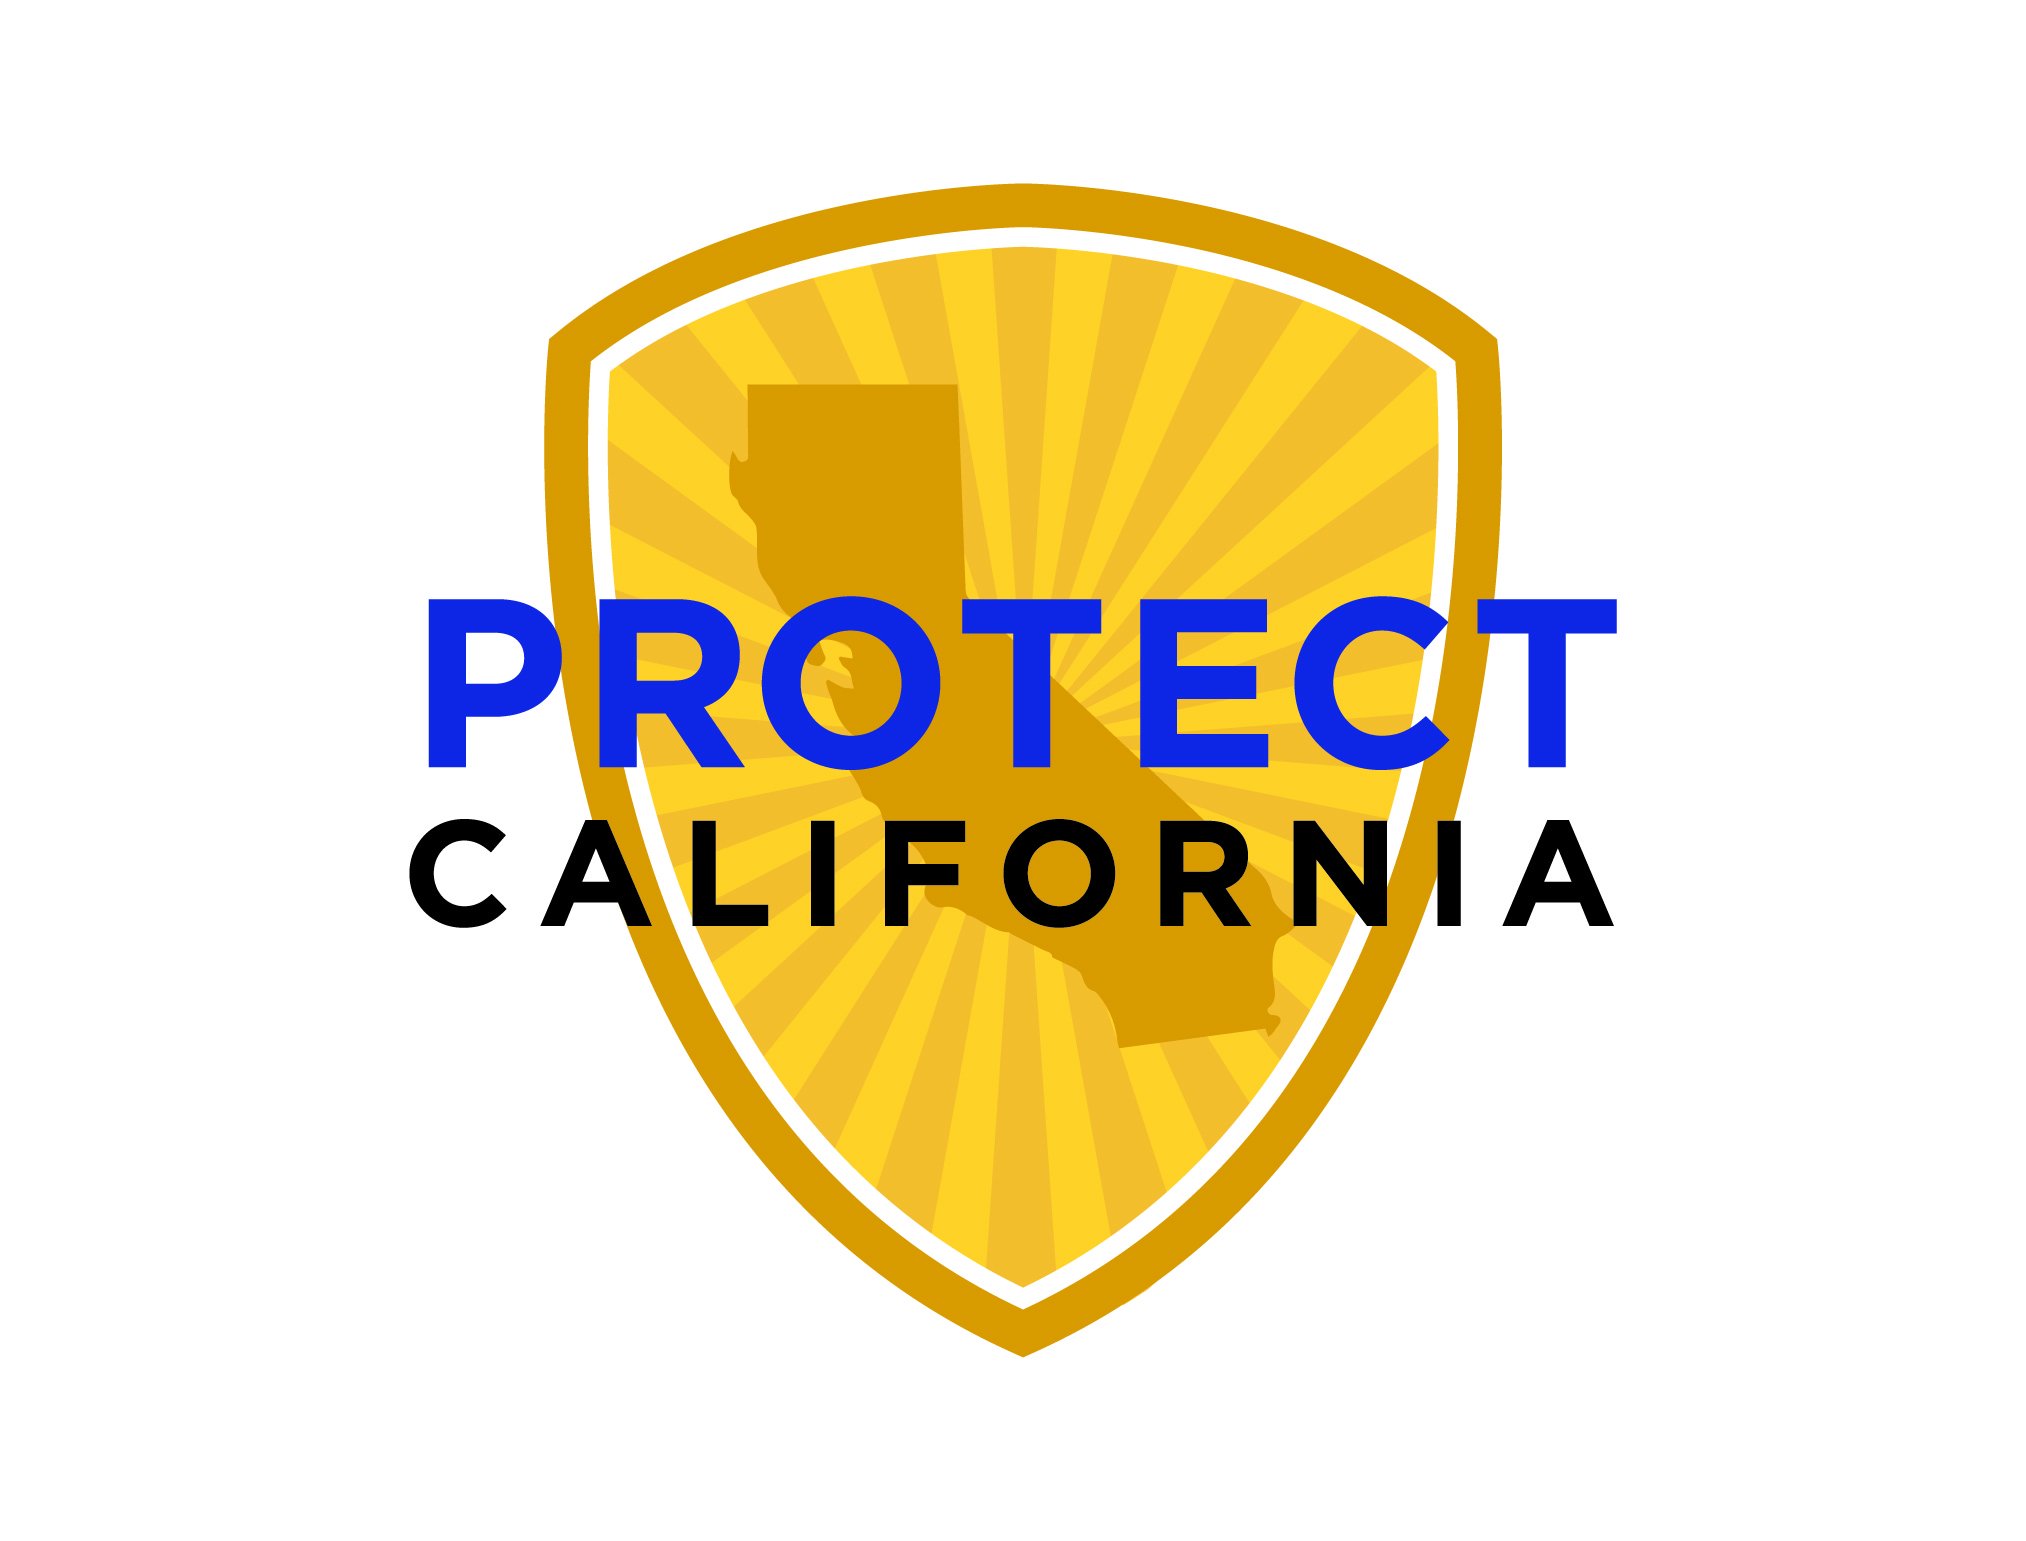 Protect California is a 501(c)(4) that educates the public on how to make CA safer, improve knowledge of policing strategies & challenges law enforcement faces.